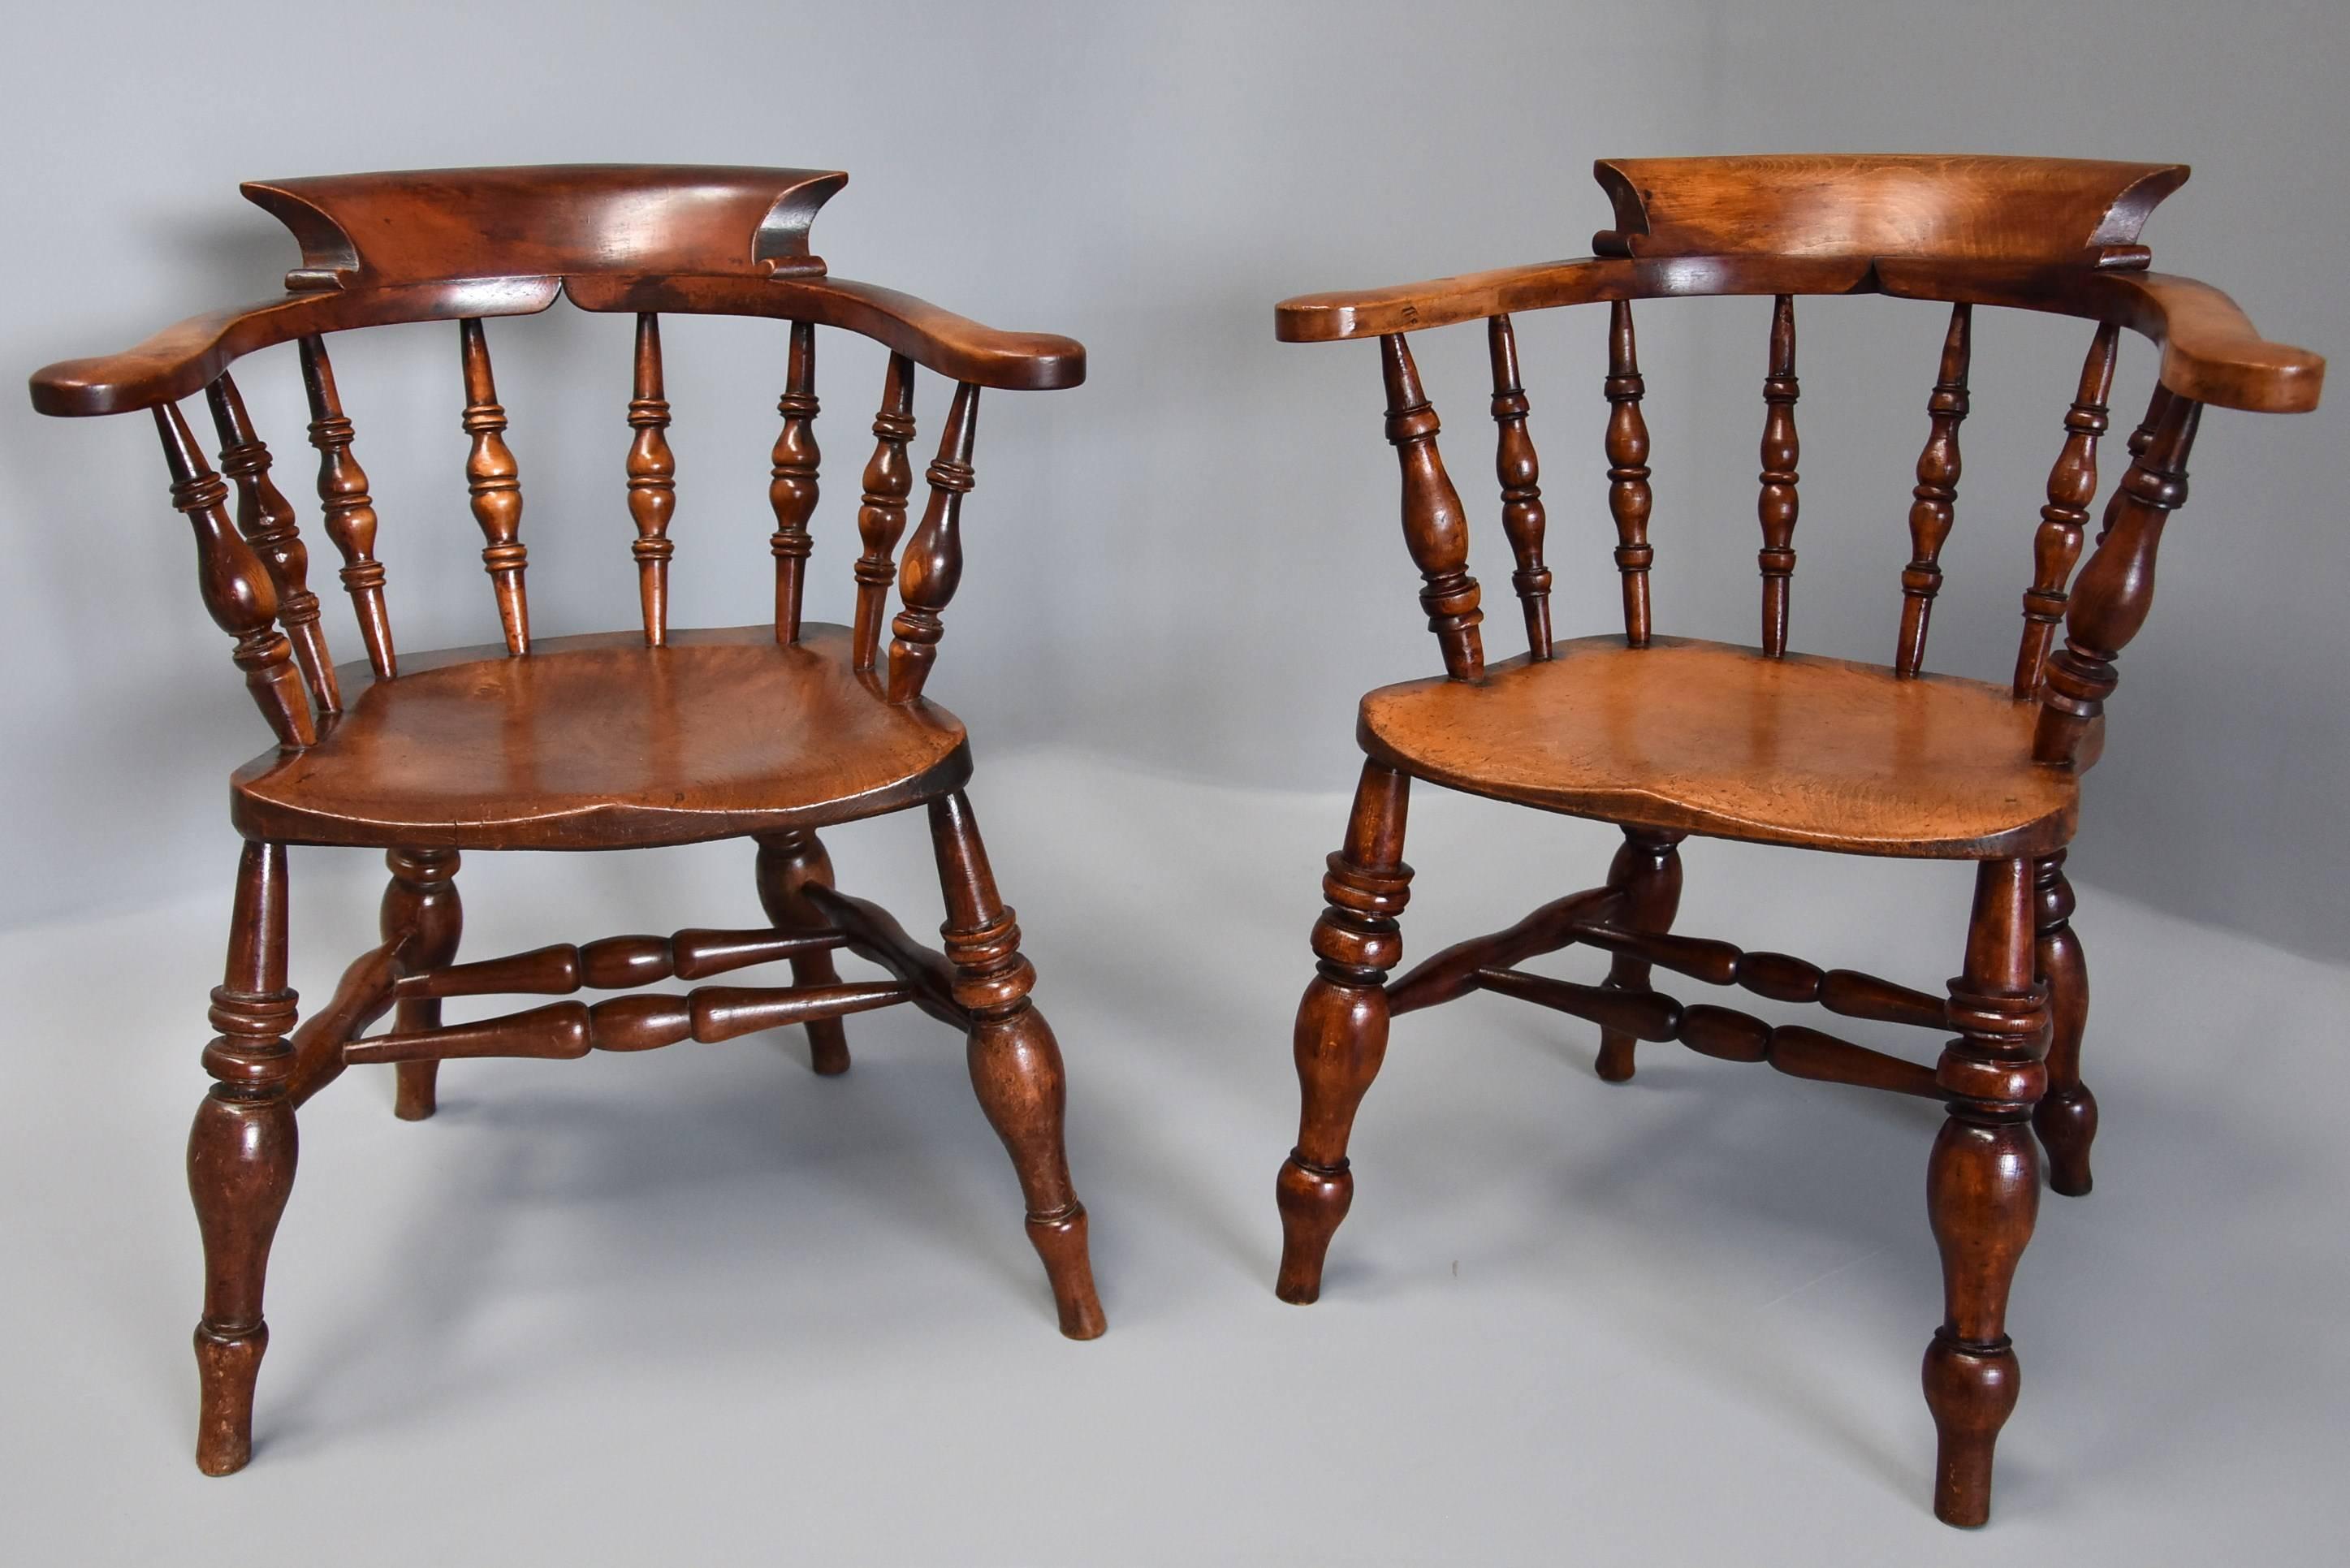 Large Matched Set of Eight Mid-19th Century Smokers Bow Chairs or Office Chairs 3